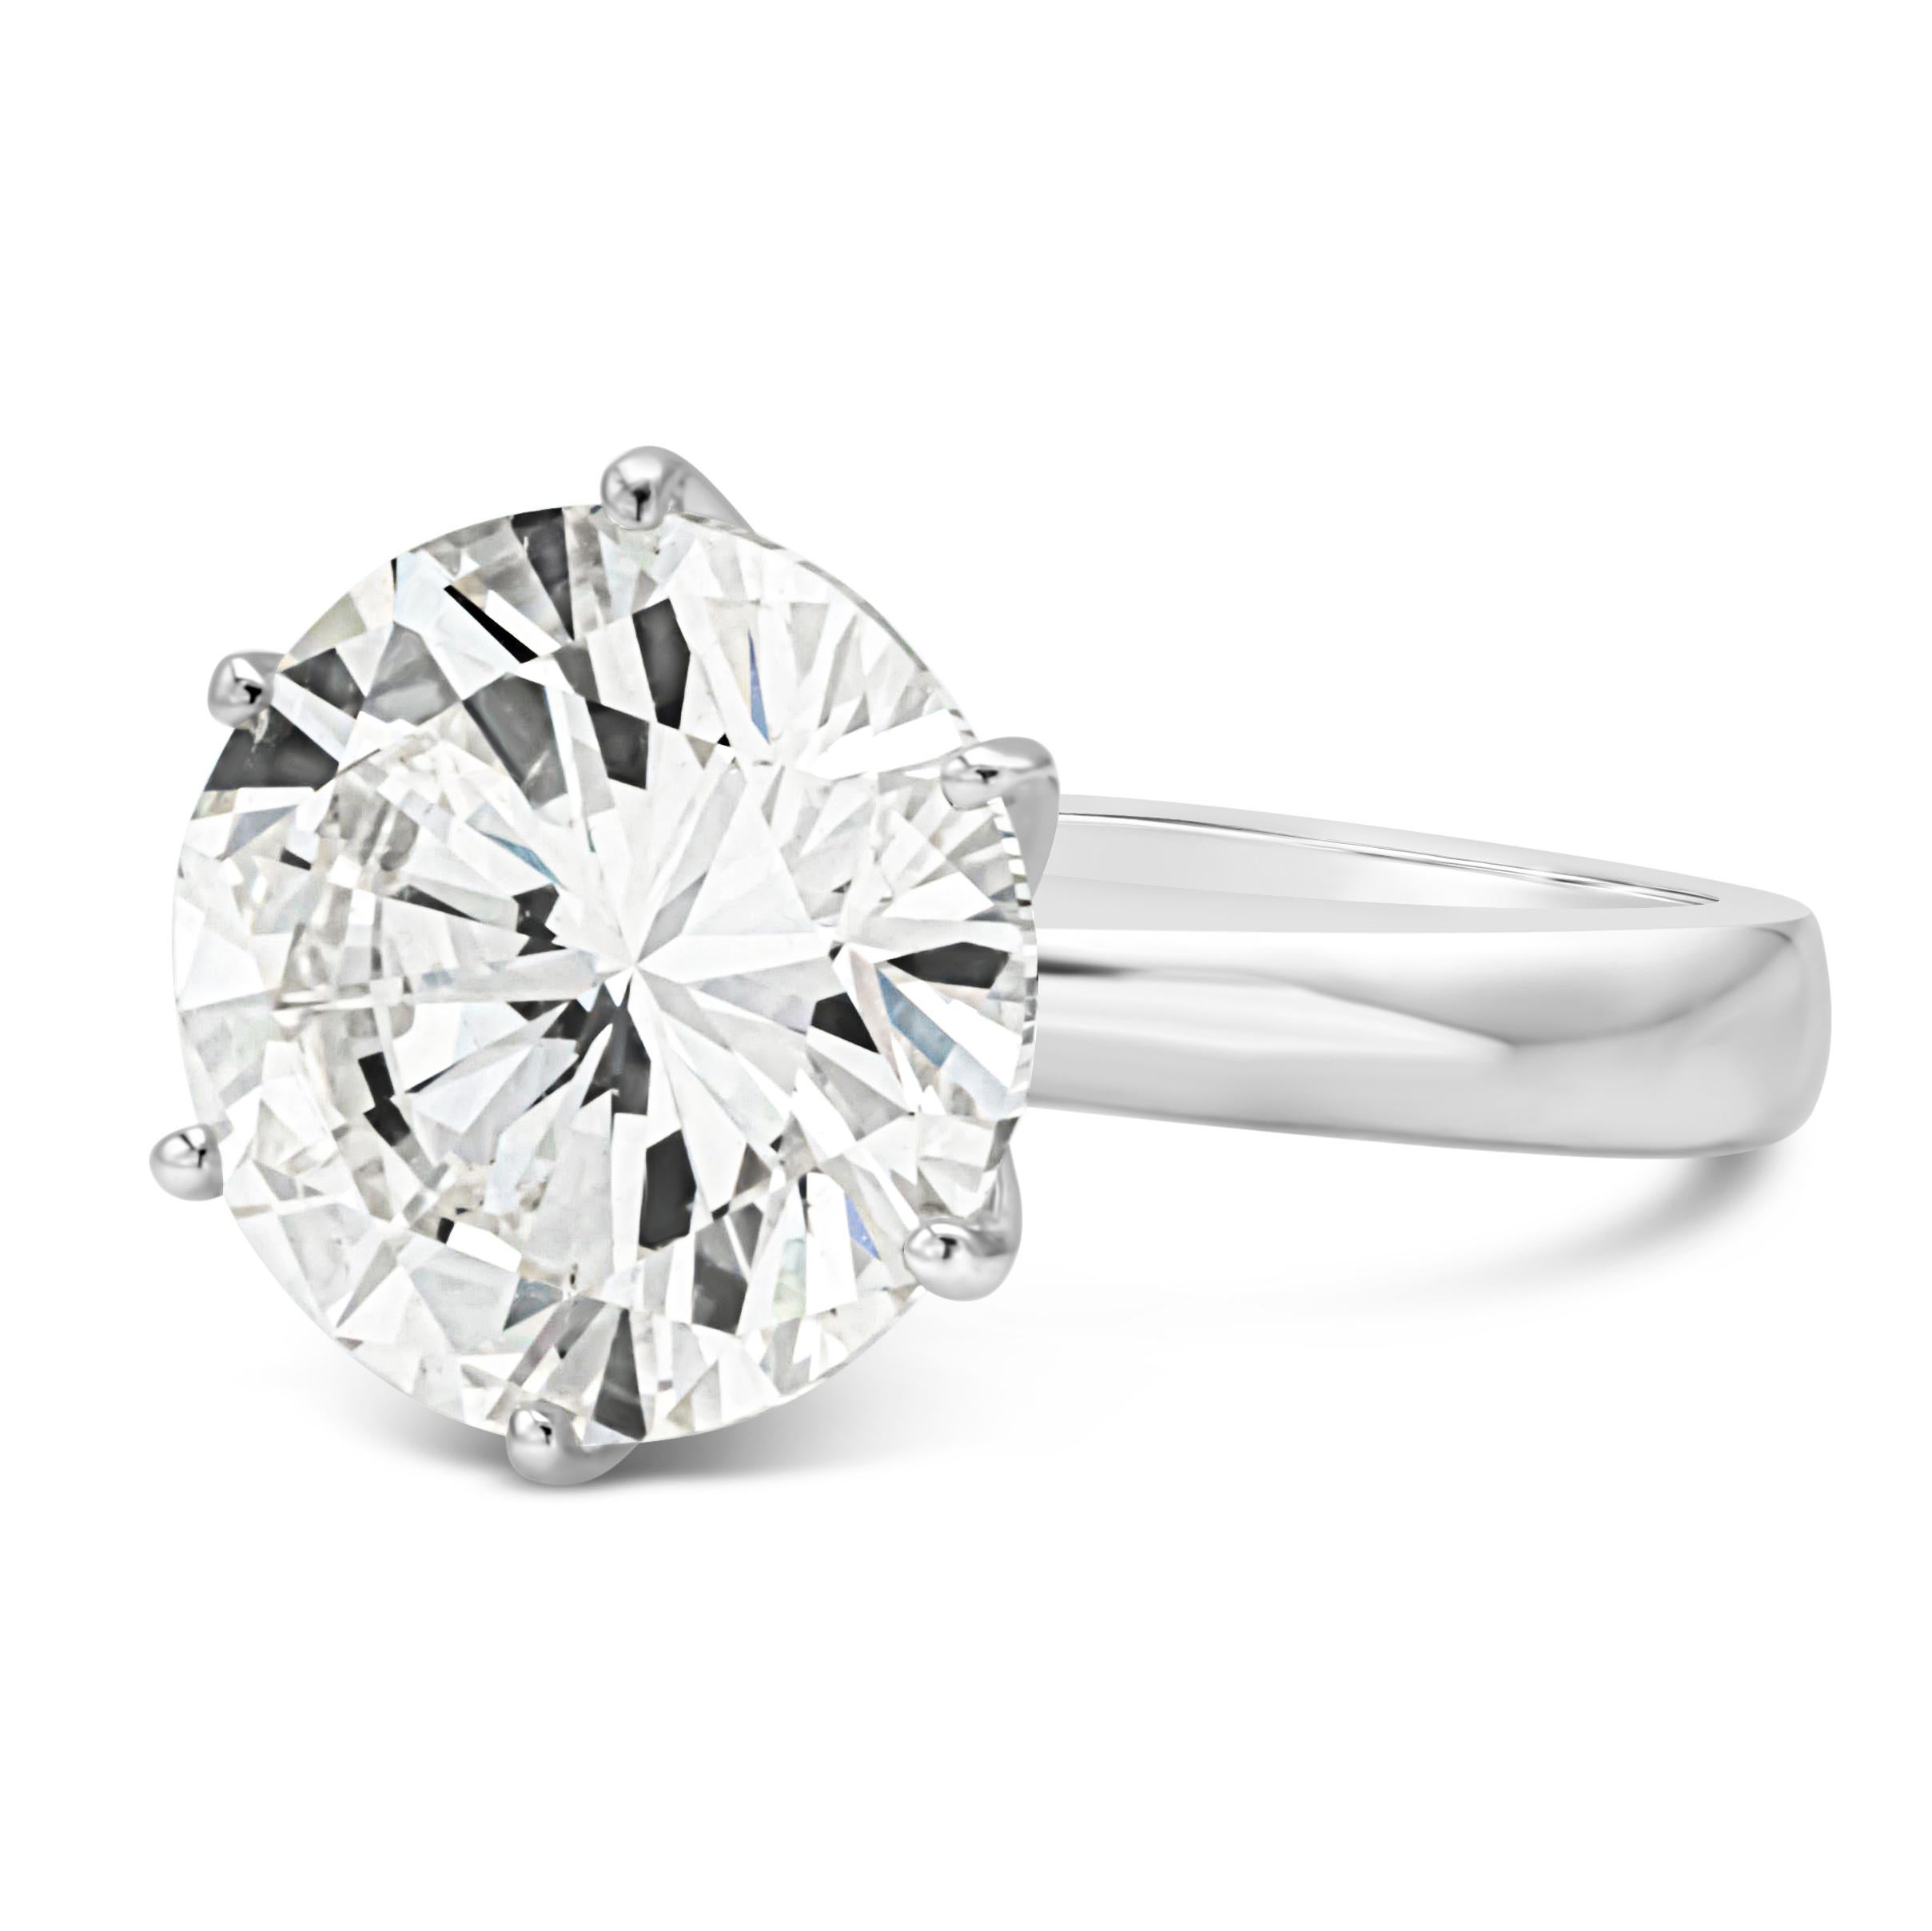 A classic and timeless solitaire engagement ring showcasing a 7.00 carat total round brilliant diamond certified by GIA as L Color, SI2 in Clarity. The diamond is set in a six-prong setting and made in 18k white gold.